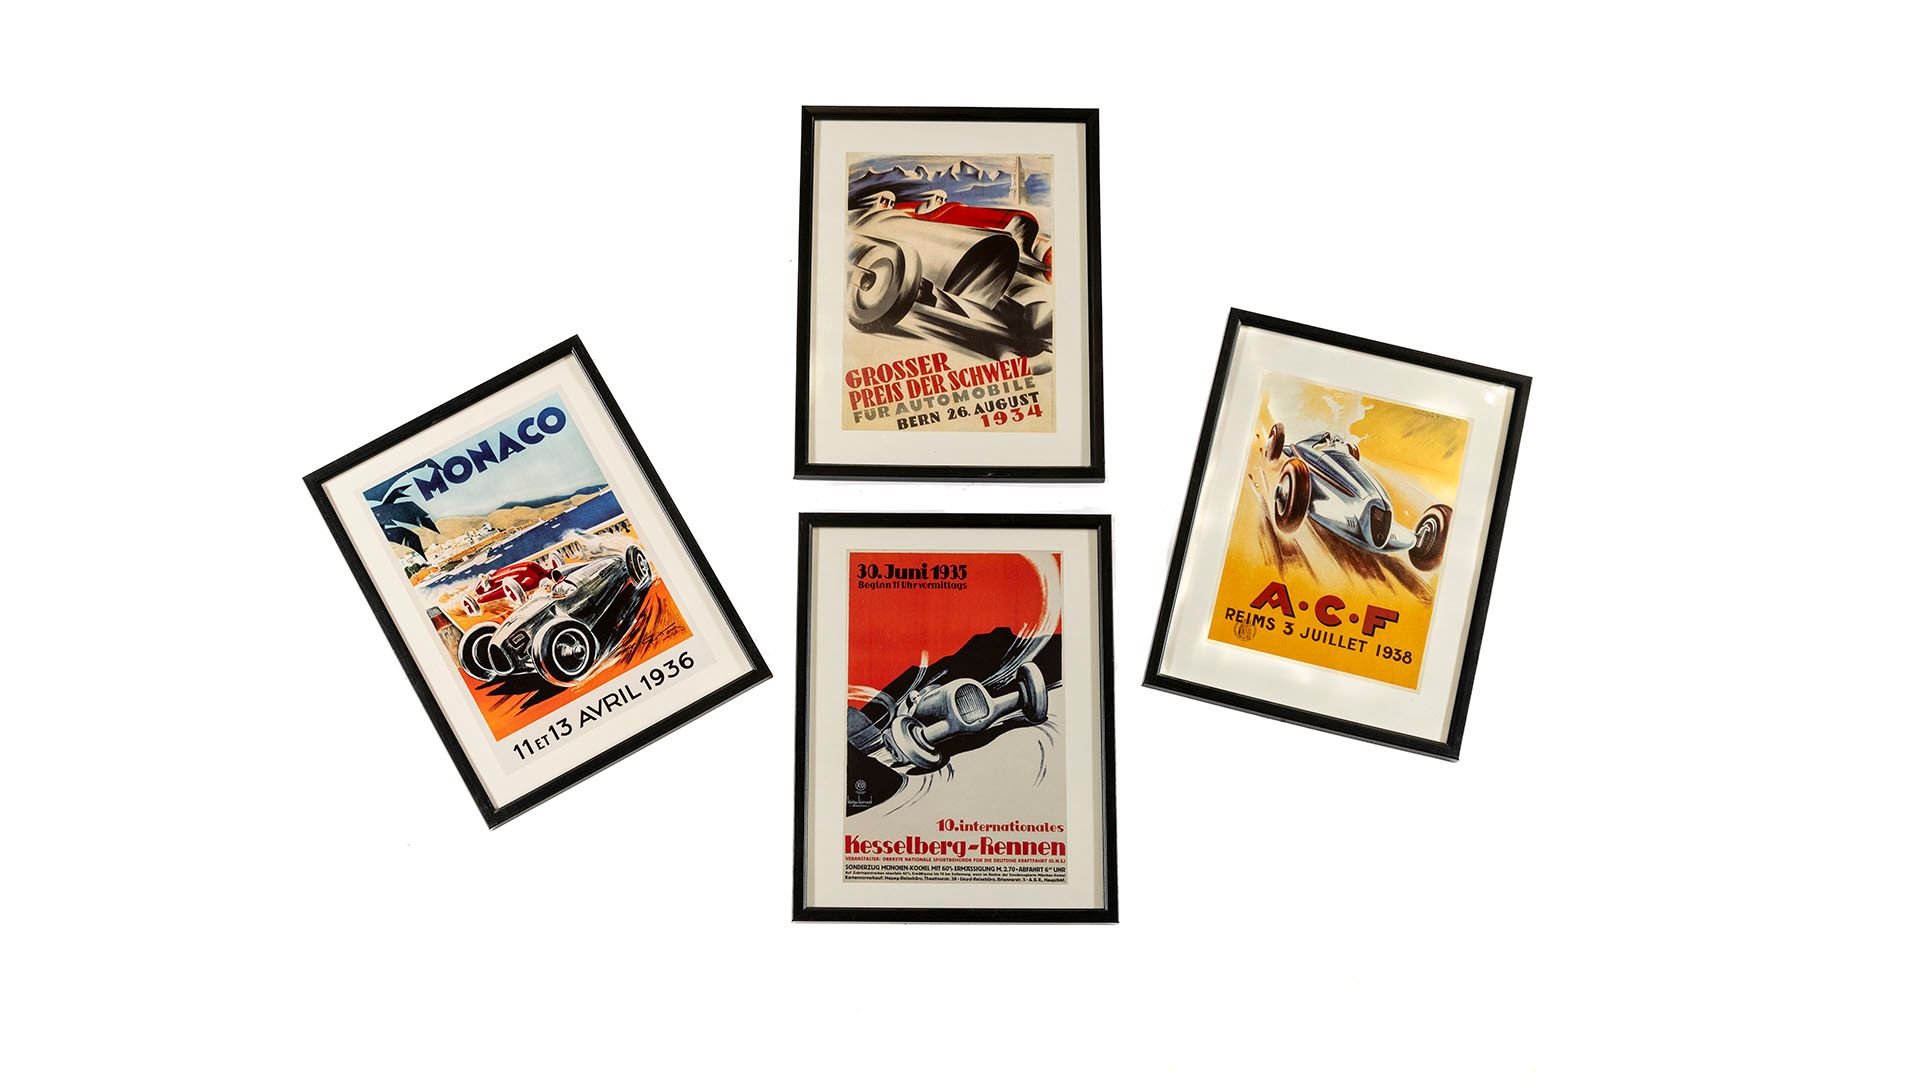 Broad Arrow Auctions | Set of framed Event Poster Prints